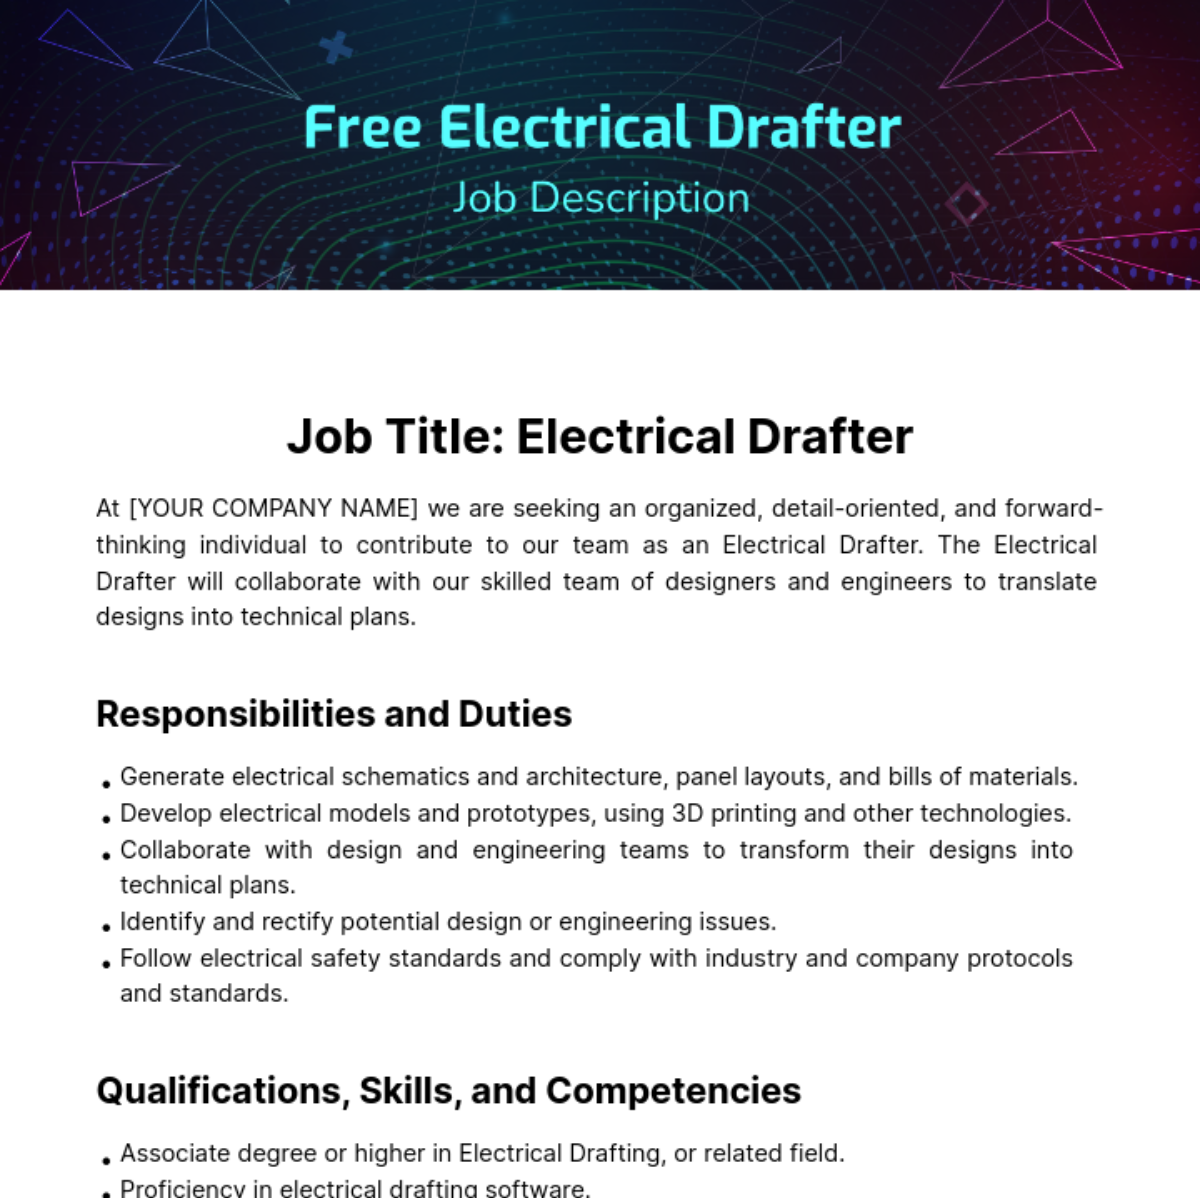 Free Electrical Drafter Job Description Template